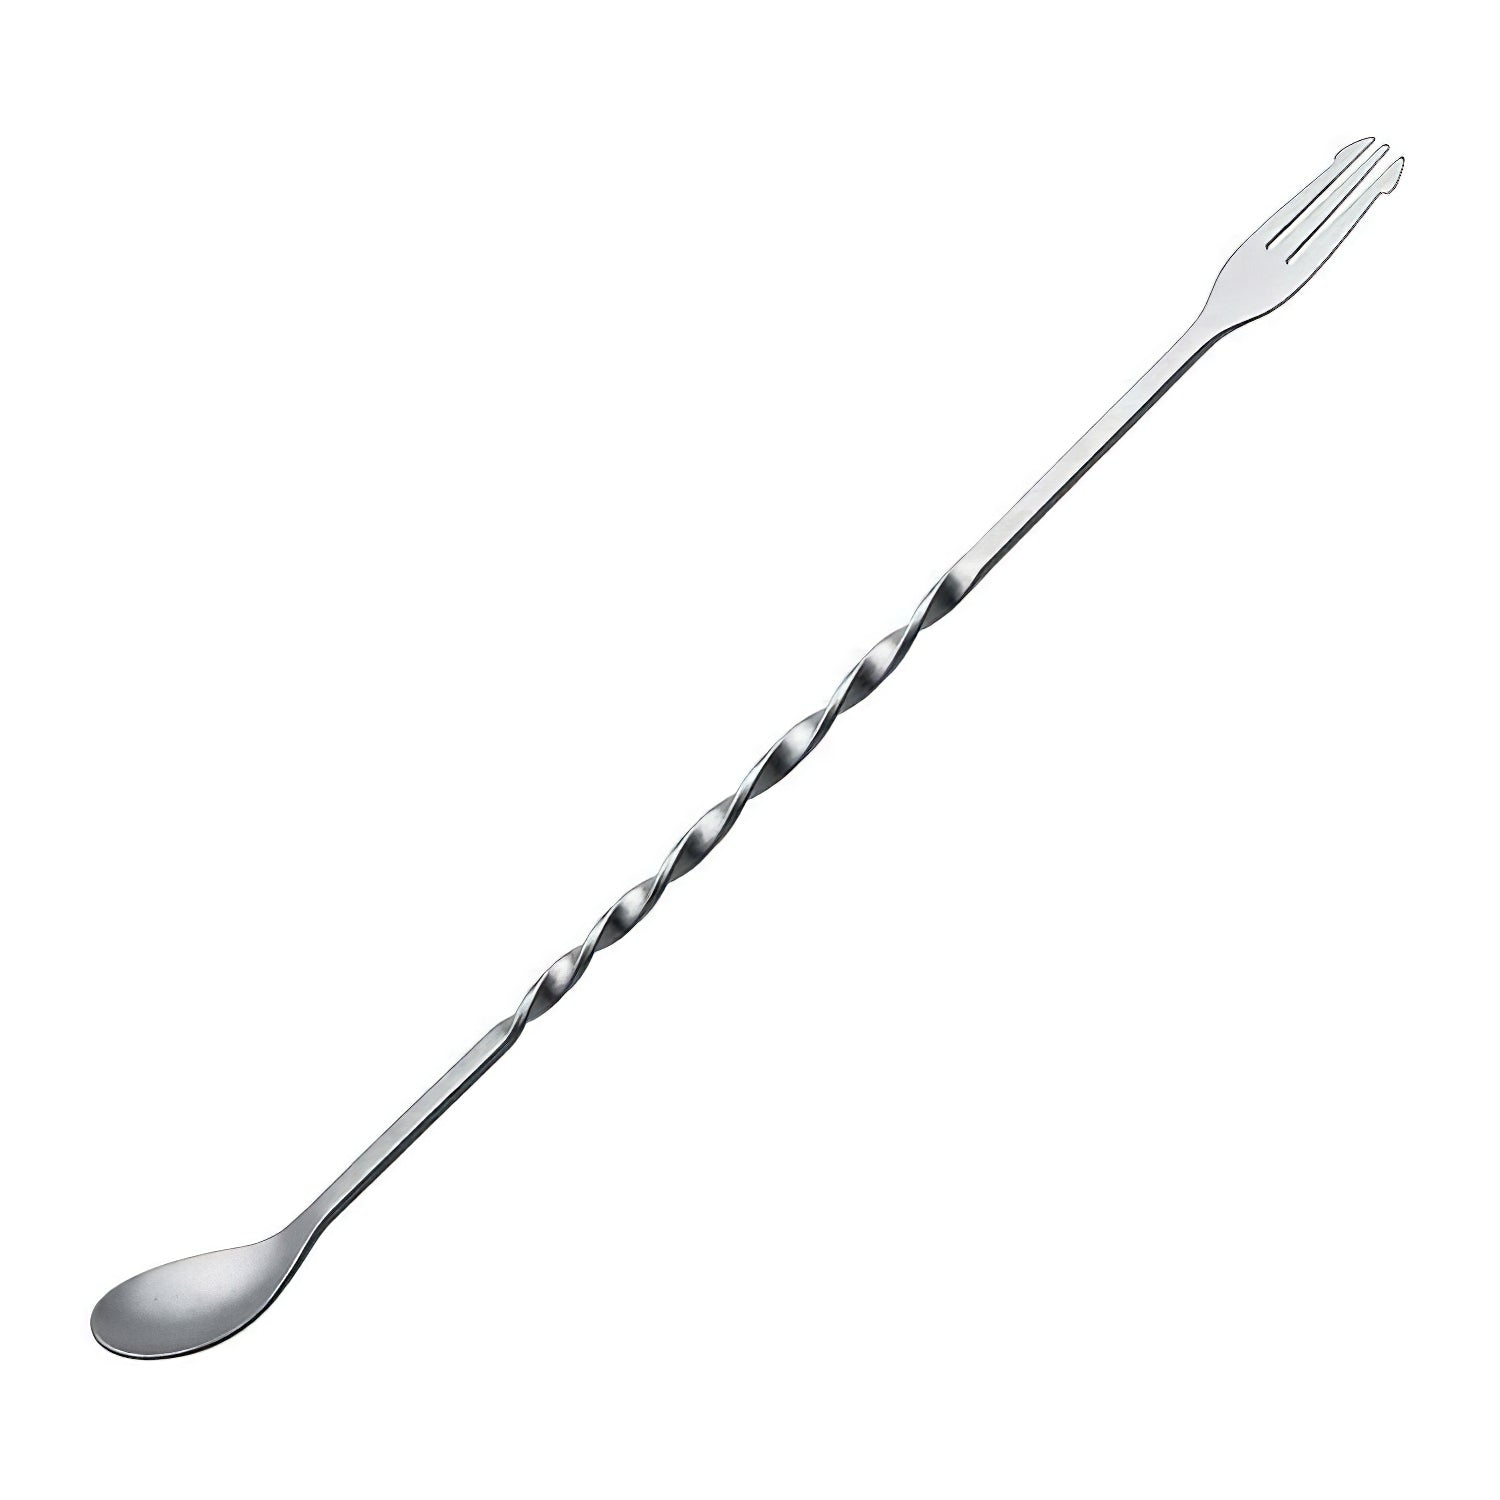 Aoyoshi 31.8cm Stainless Steel Bar Spoon - Vintage Style